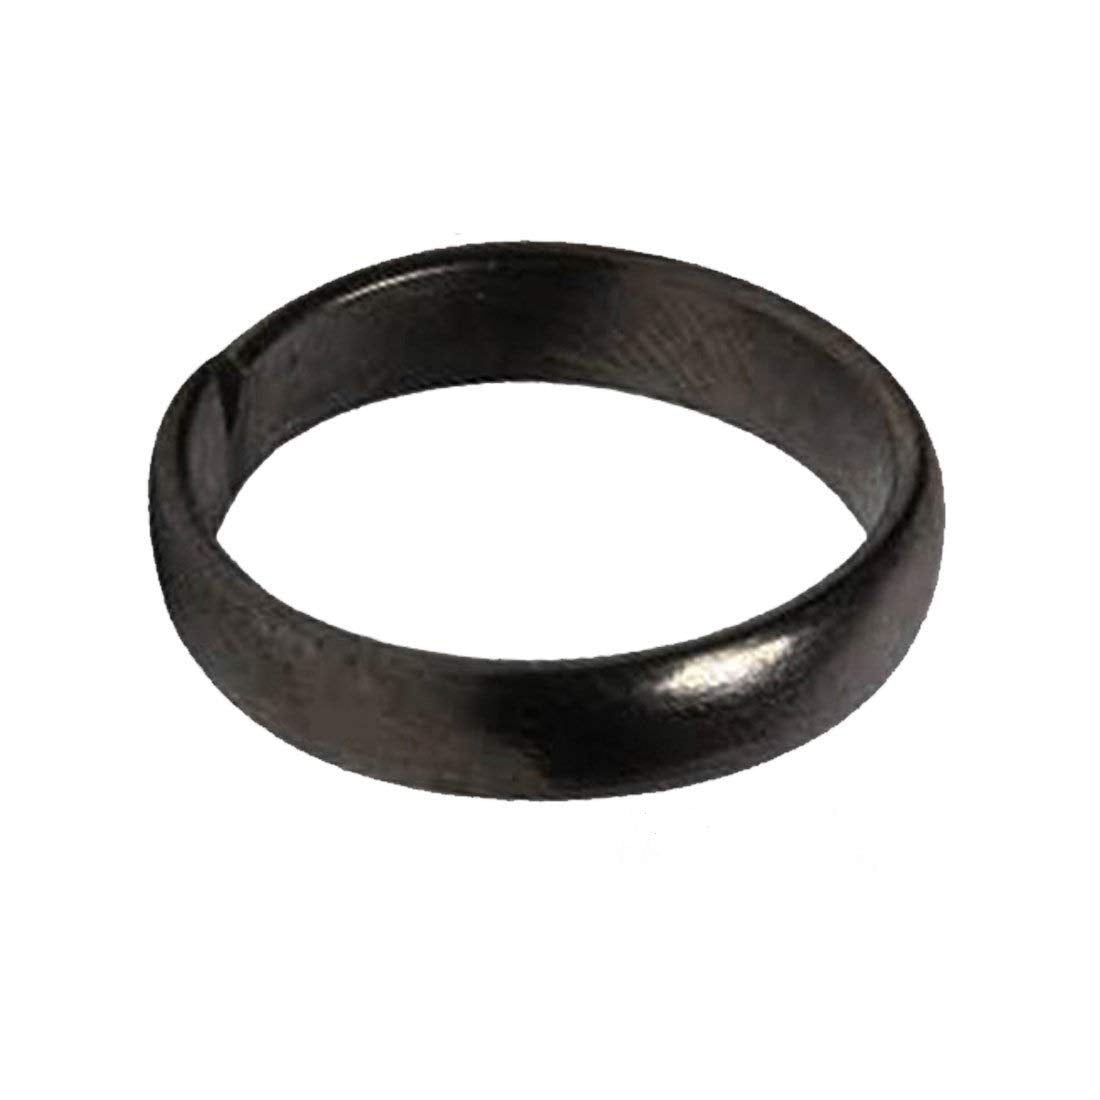 Real Black Horse Shoe Shani Dosh Removal Iron Ring for Unisex (pack of 3)